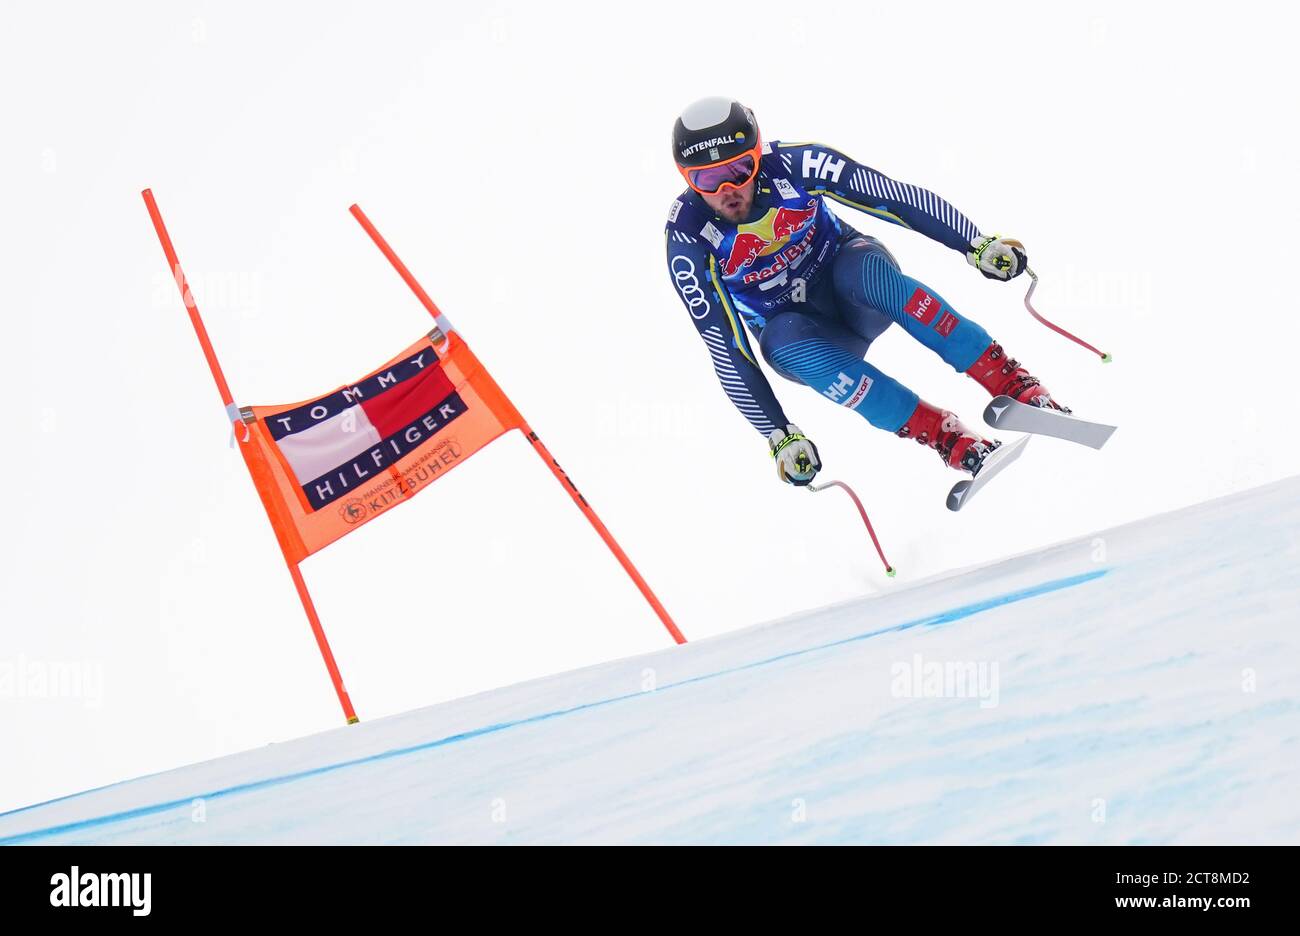 Alexander Koell during the Men's Downhill event for the 2019-20 FIS Alpine Ski World Cup in Kitzbuhel, Austria.   PHOTO CREDIT : © MARK PAIN / ALAMY Stock Photo